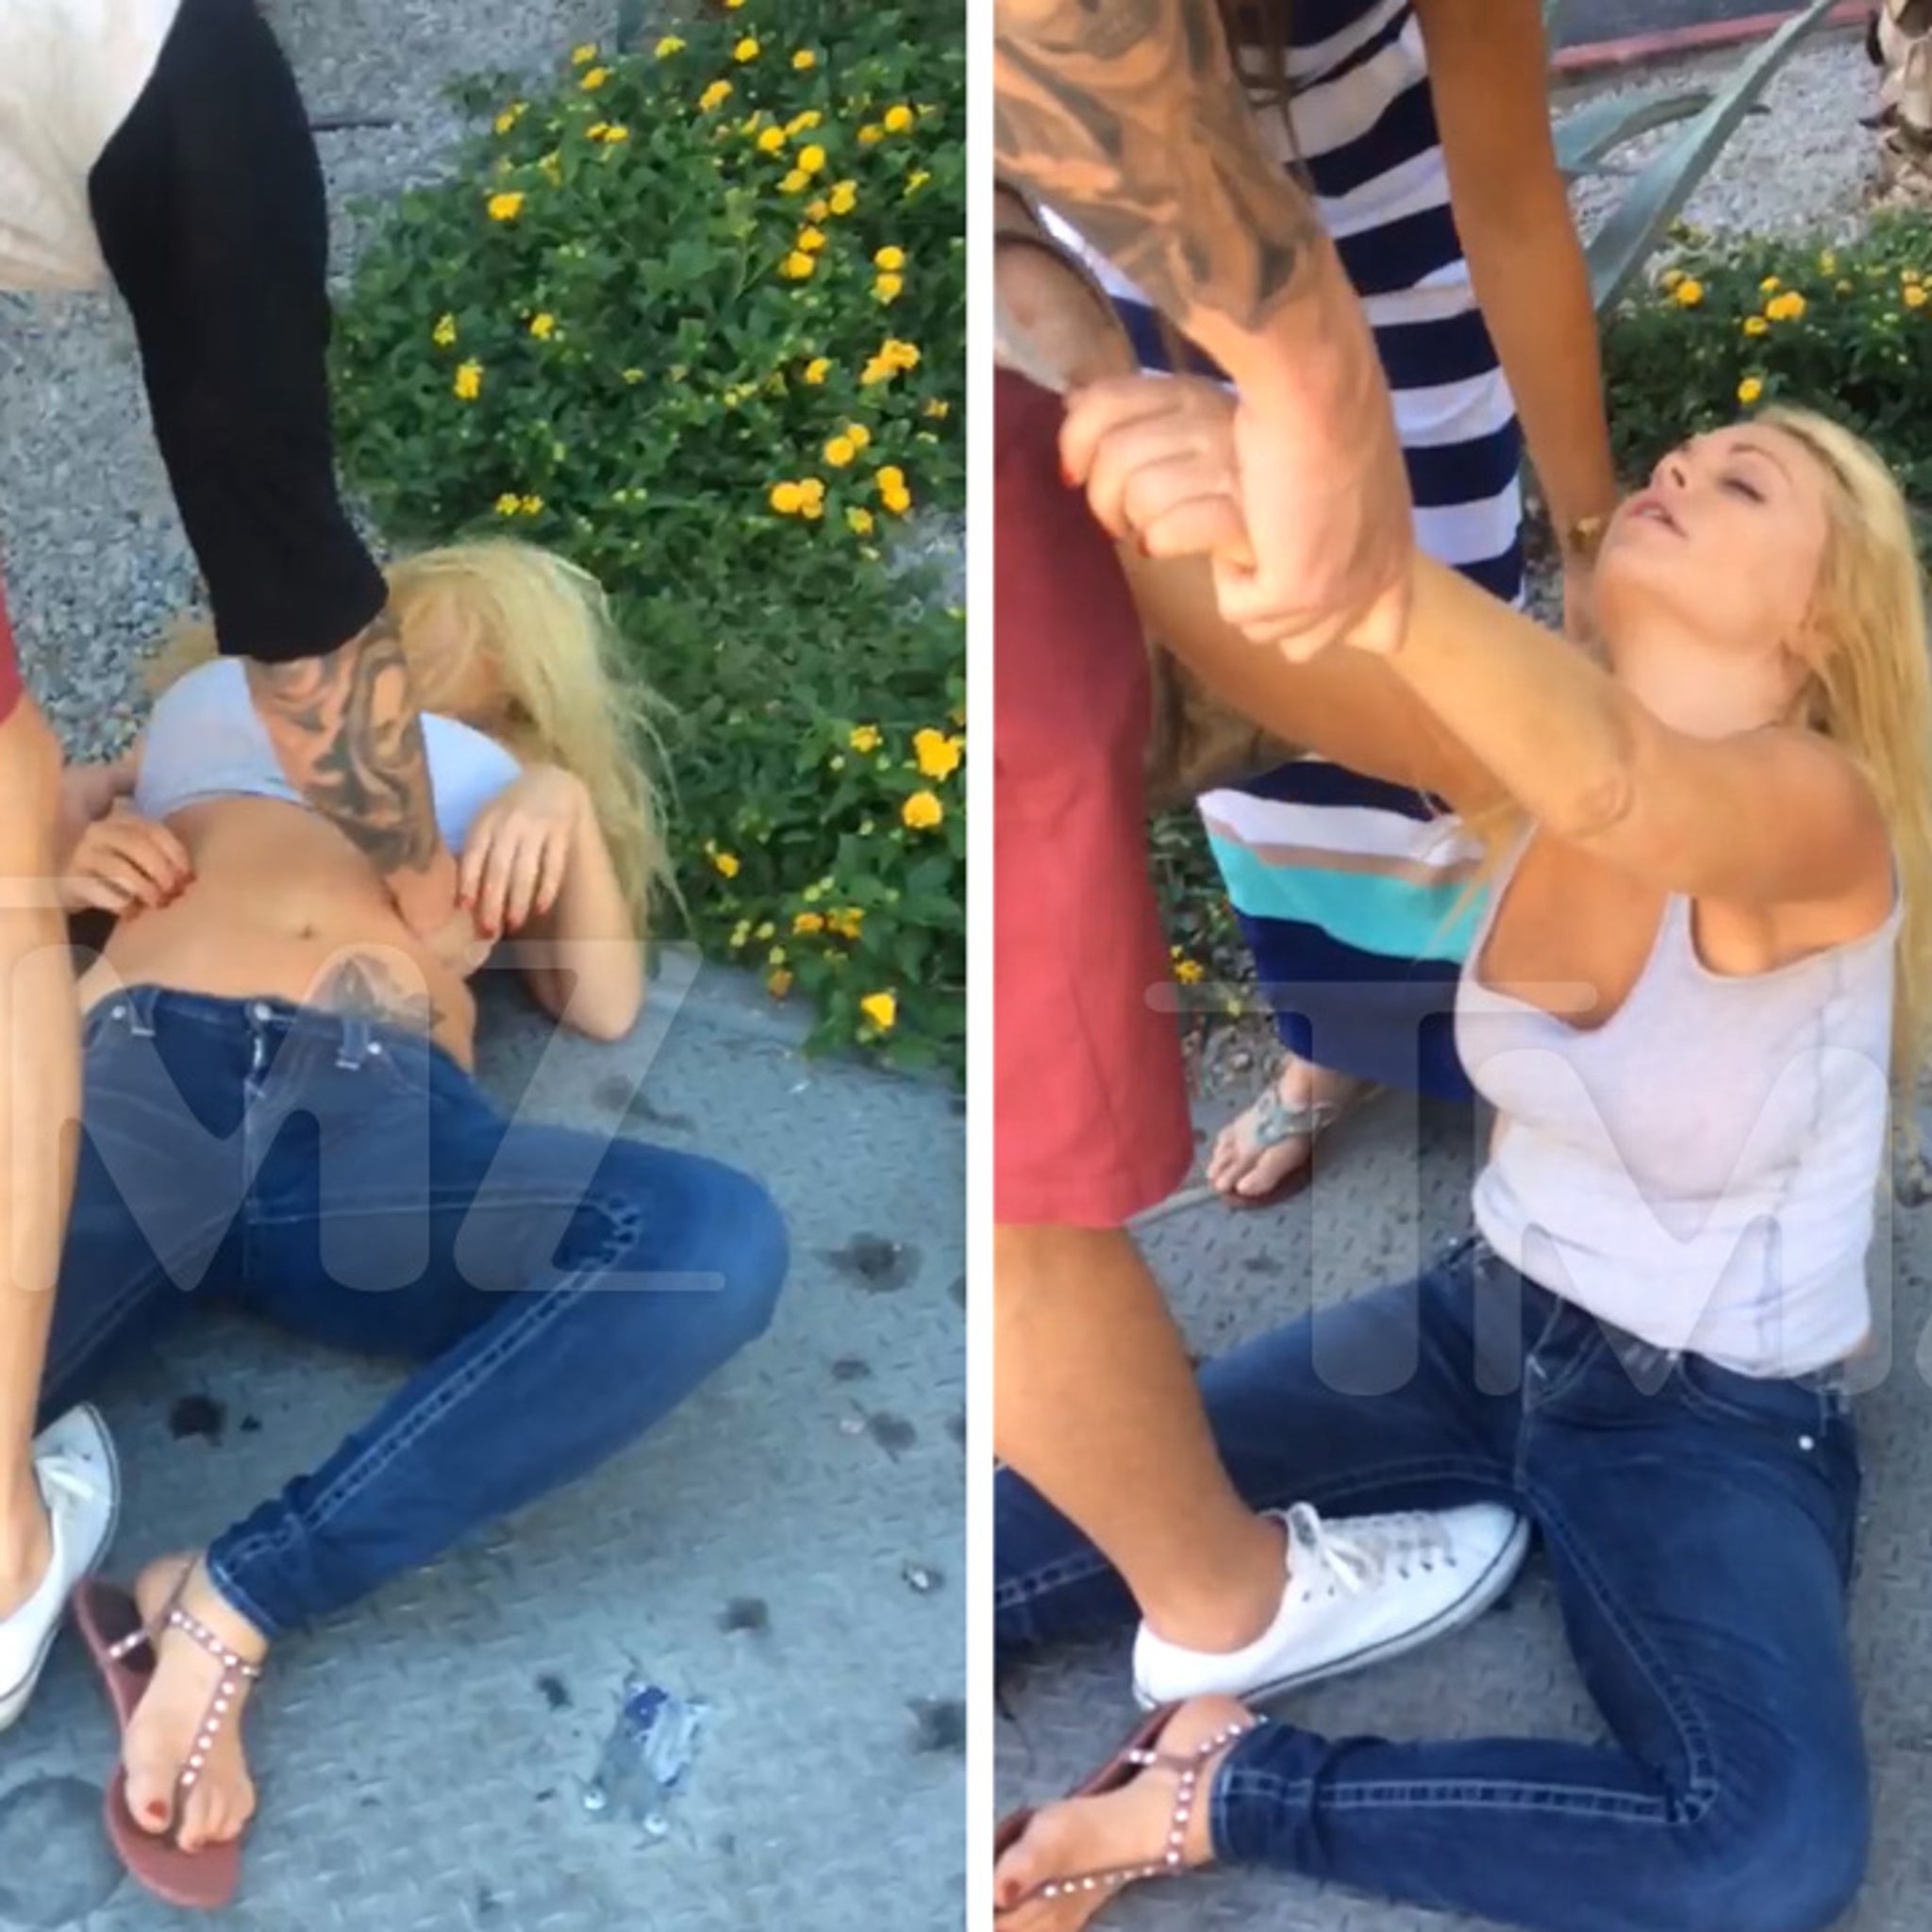 Porn Star Jesse Jane -- Passed OUT COLD On the Vegas Strip! (VIDEO) photo picture